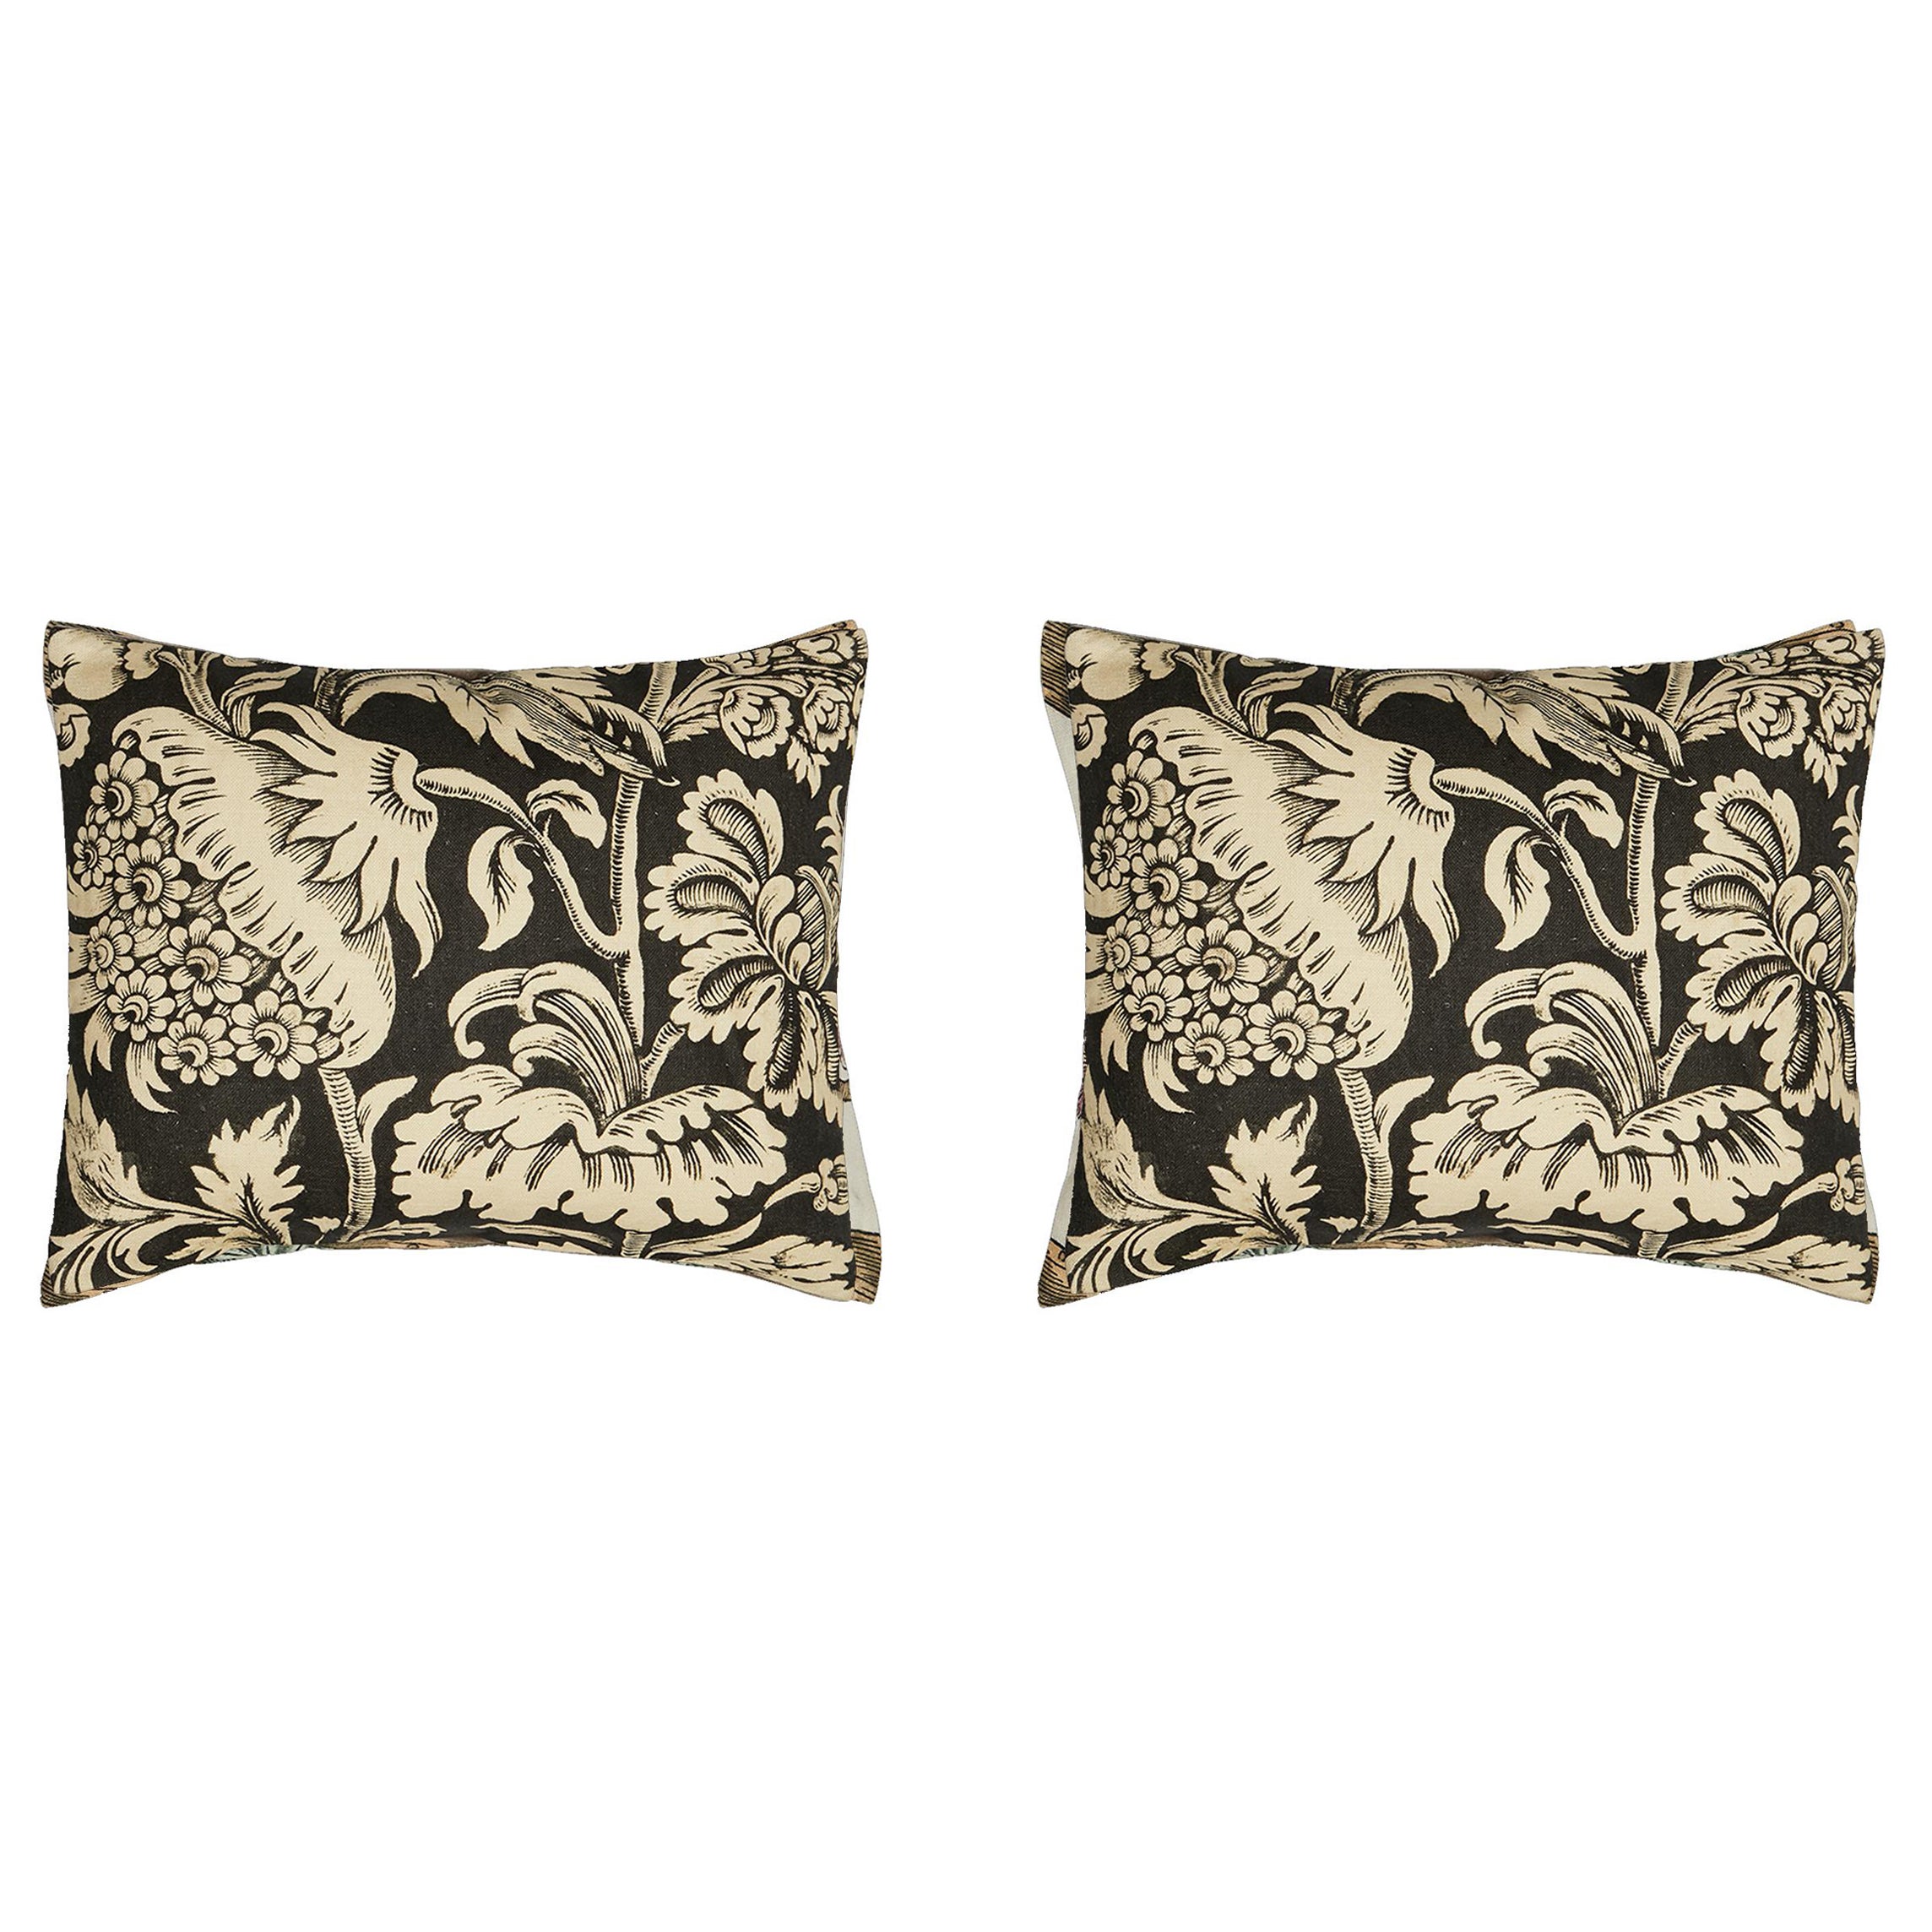 Pair of 12 x 16 Linen Pillows - Black White Grand Pavots pattern - Made in Paris